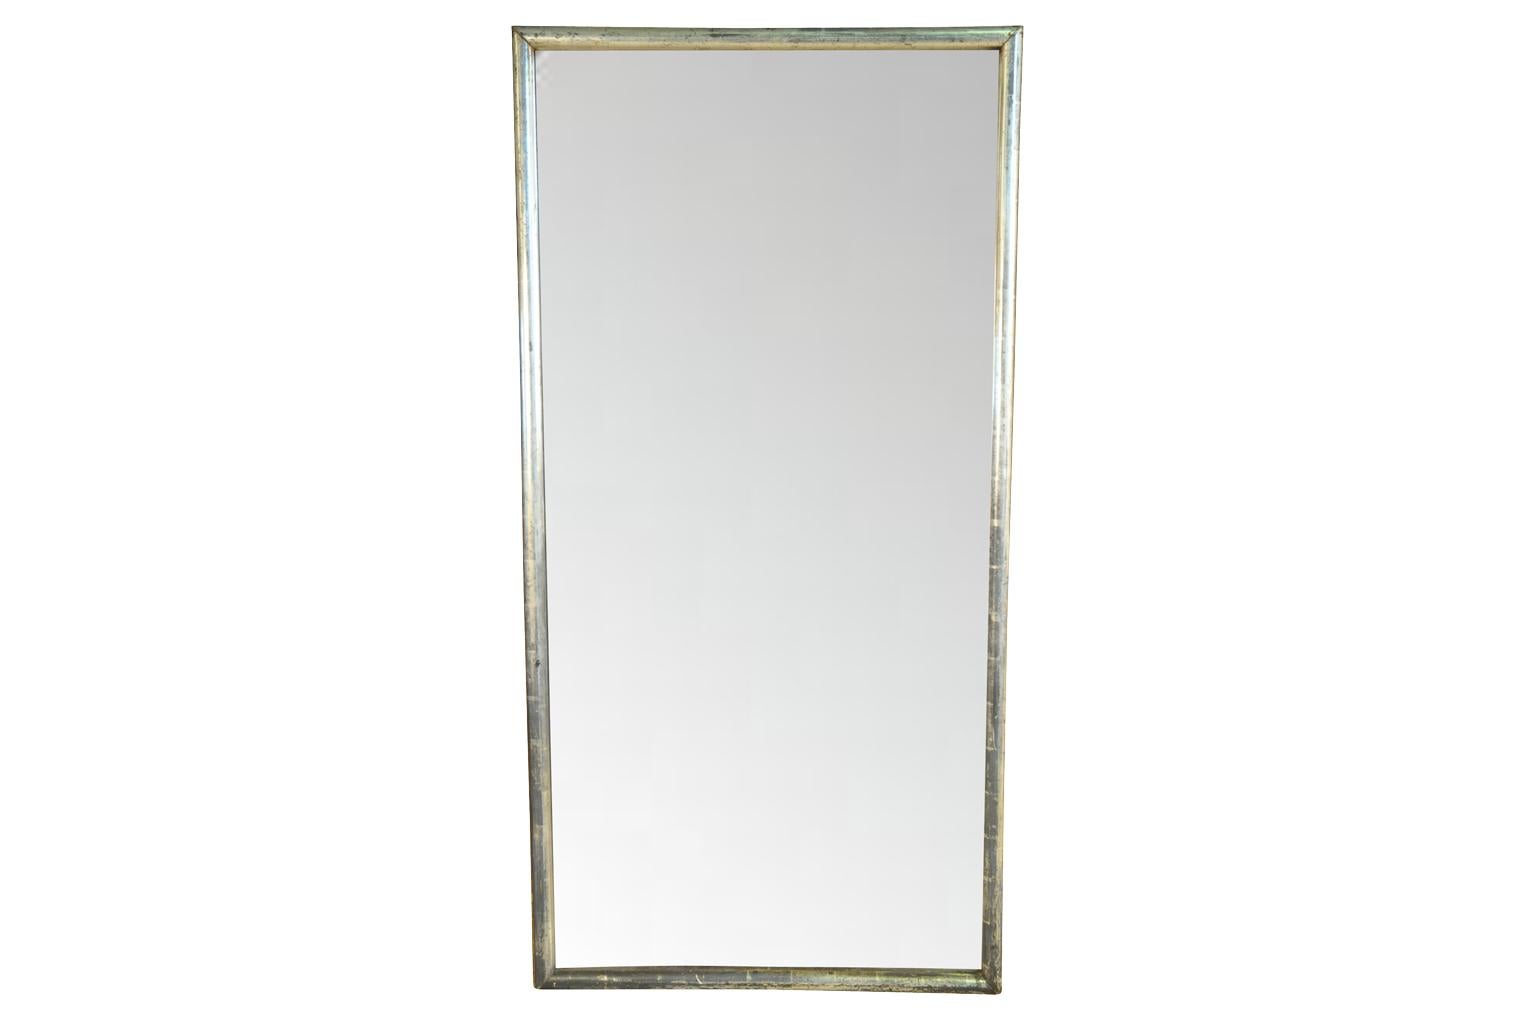 A very elegant and striking mid-19th century French mirror in silvered giltwood. The mirror retains its original mercury glass. Please note the glass in these photos has been photo shopped.